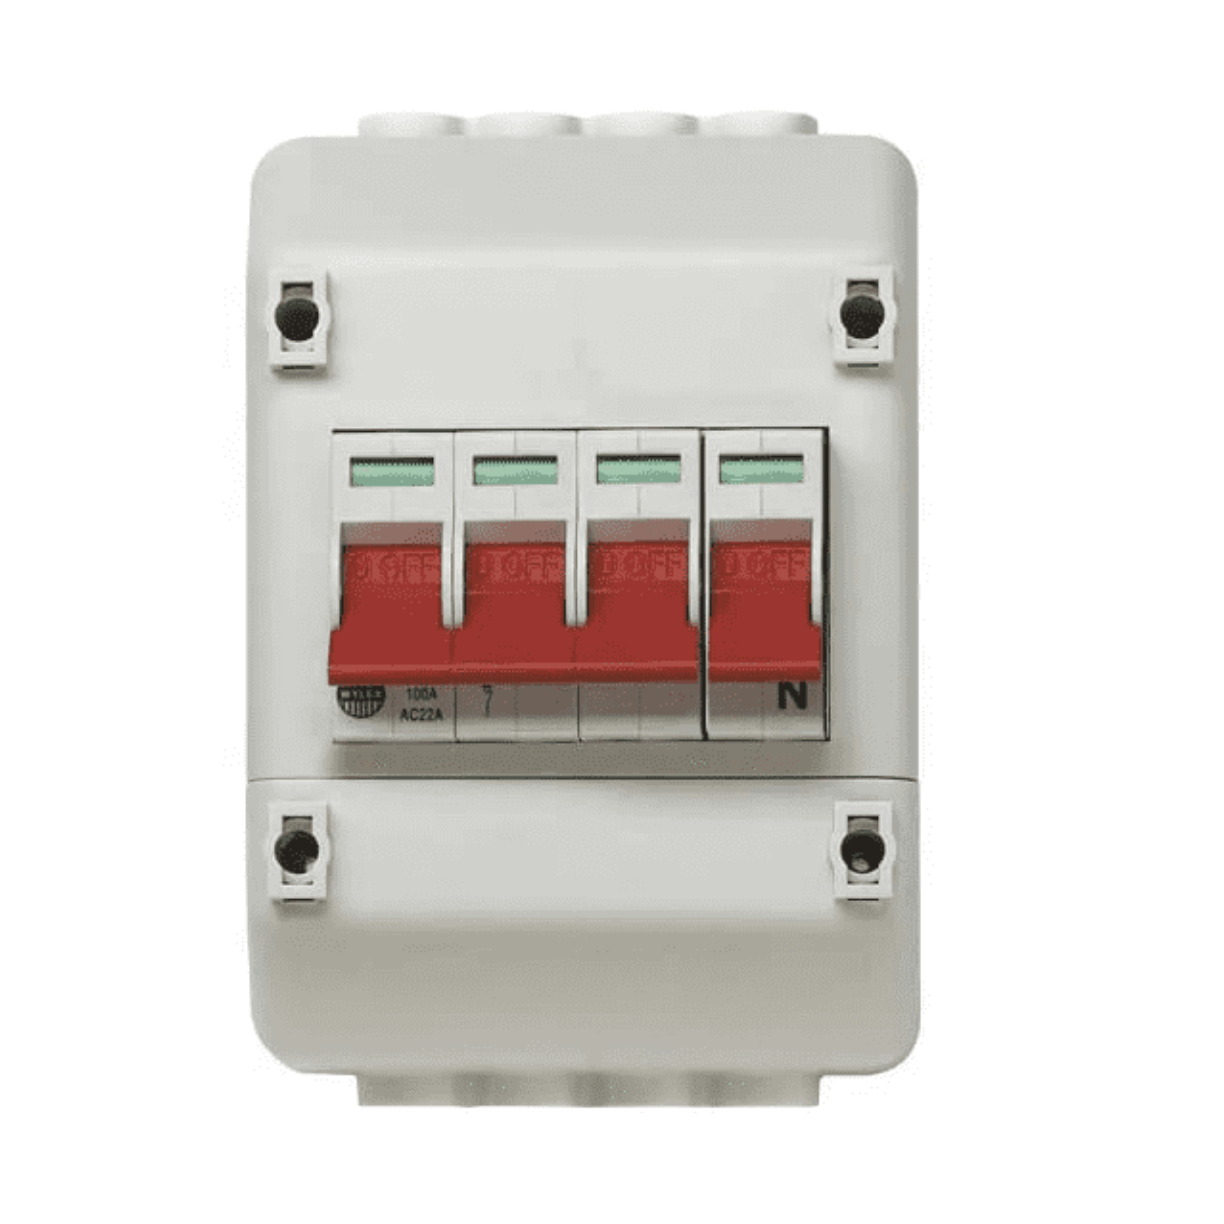 Wylex Rec4 100A 4 Pole Isolator Switch And Enclosure To Suit Meter Tails-Supplieddirect.co.uk